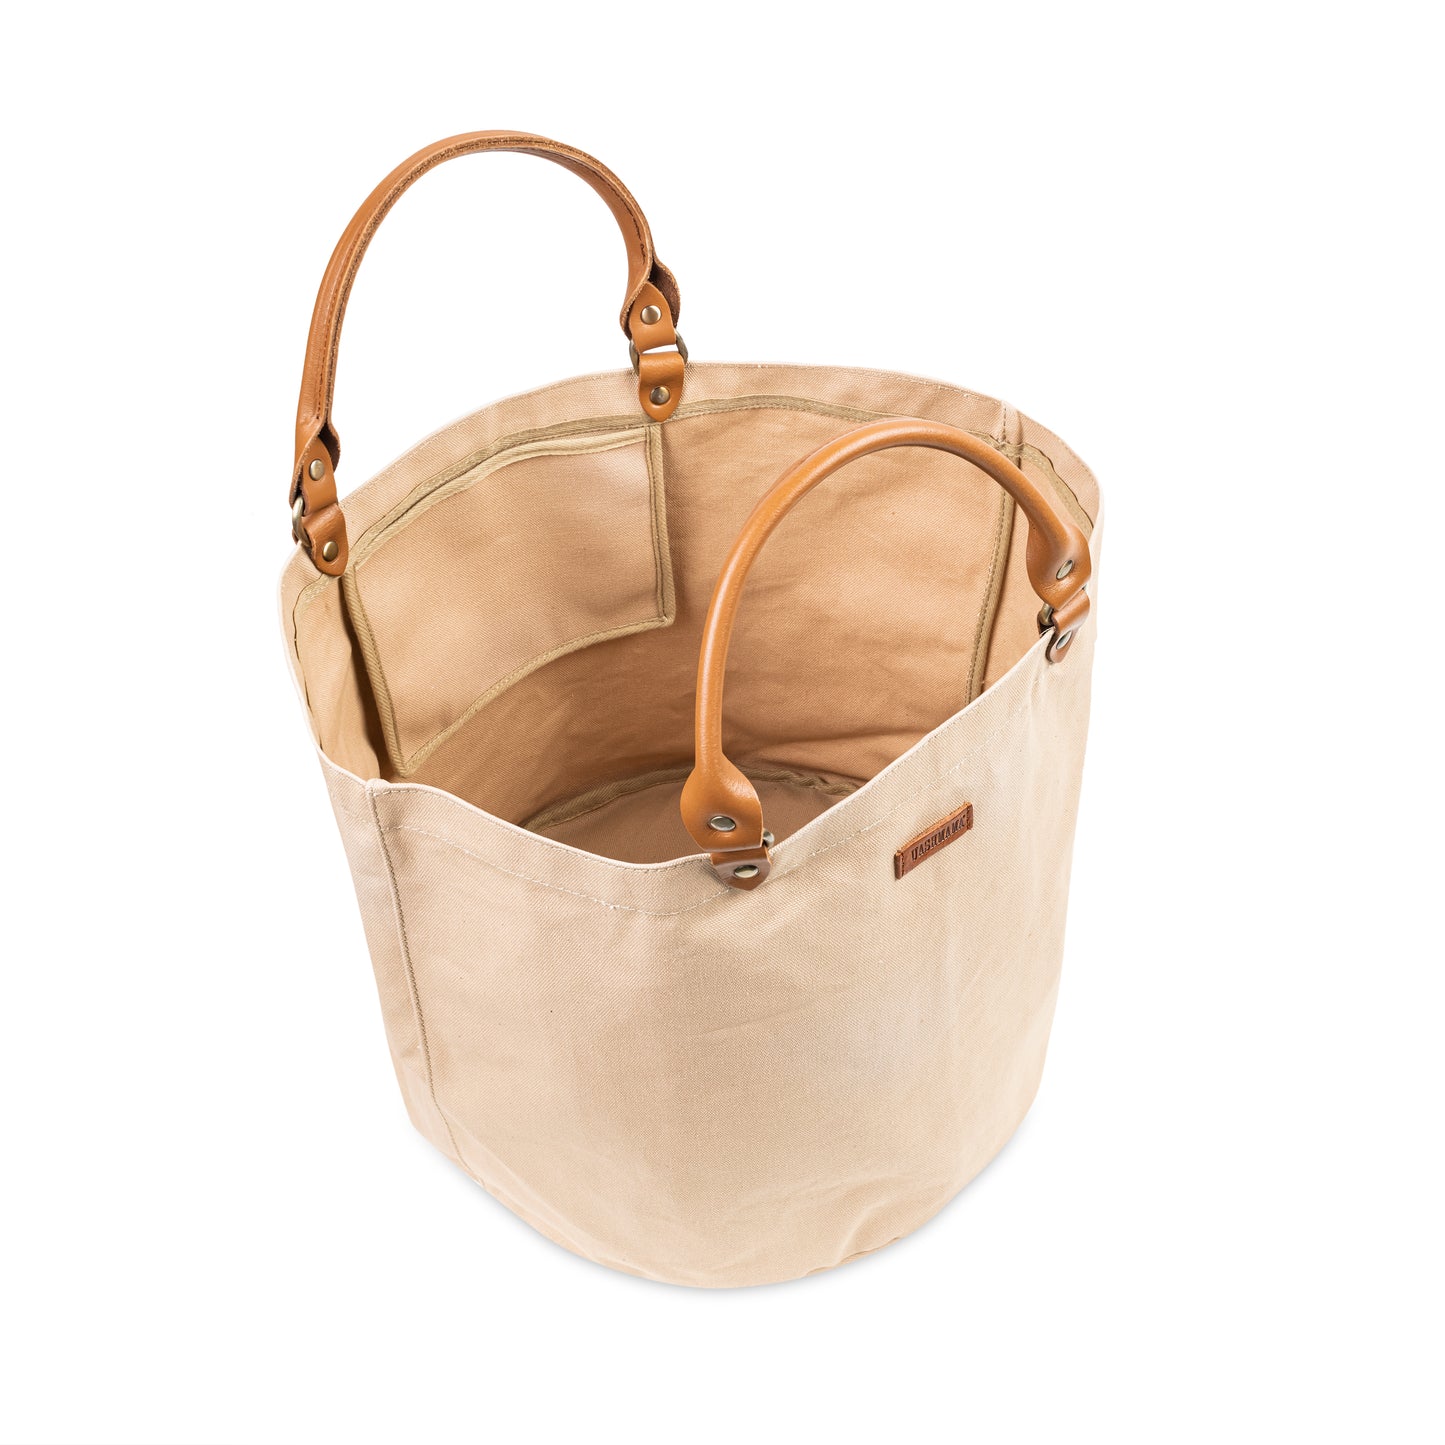 The interior of a round cotton tote bag shows one internal pocket and small leather handles